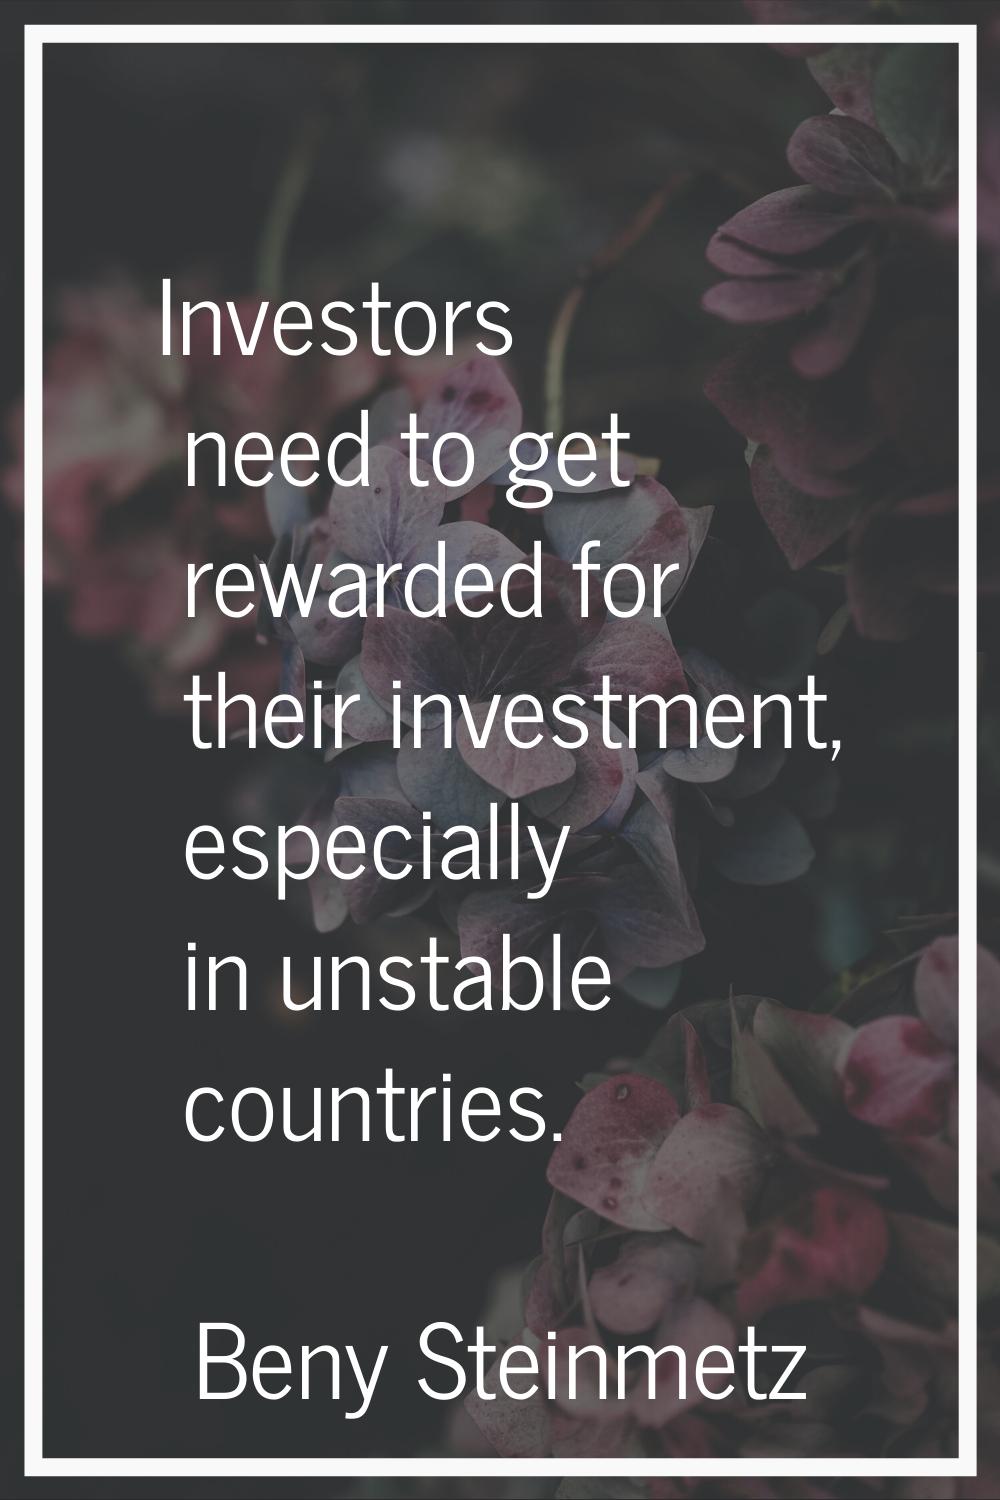 Investors need to get rewarded for their investment, especially in unstable countries.